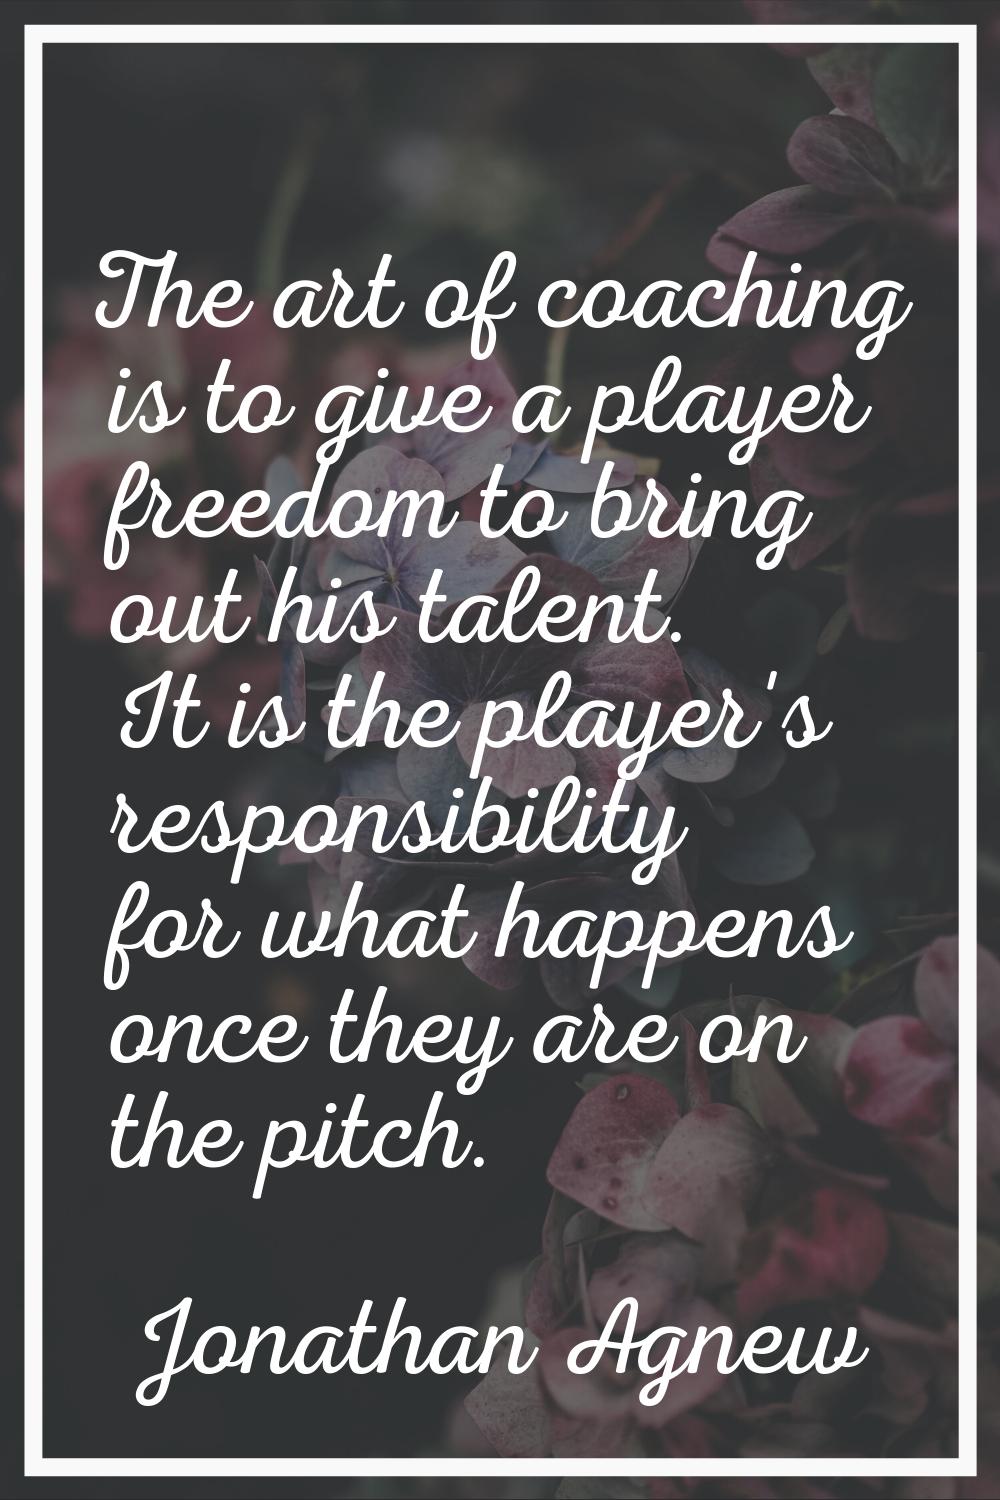 The art of coaching is to give a player freedom to bring out his talent. It is the player's respons